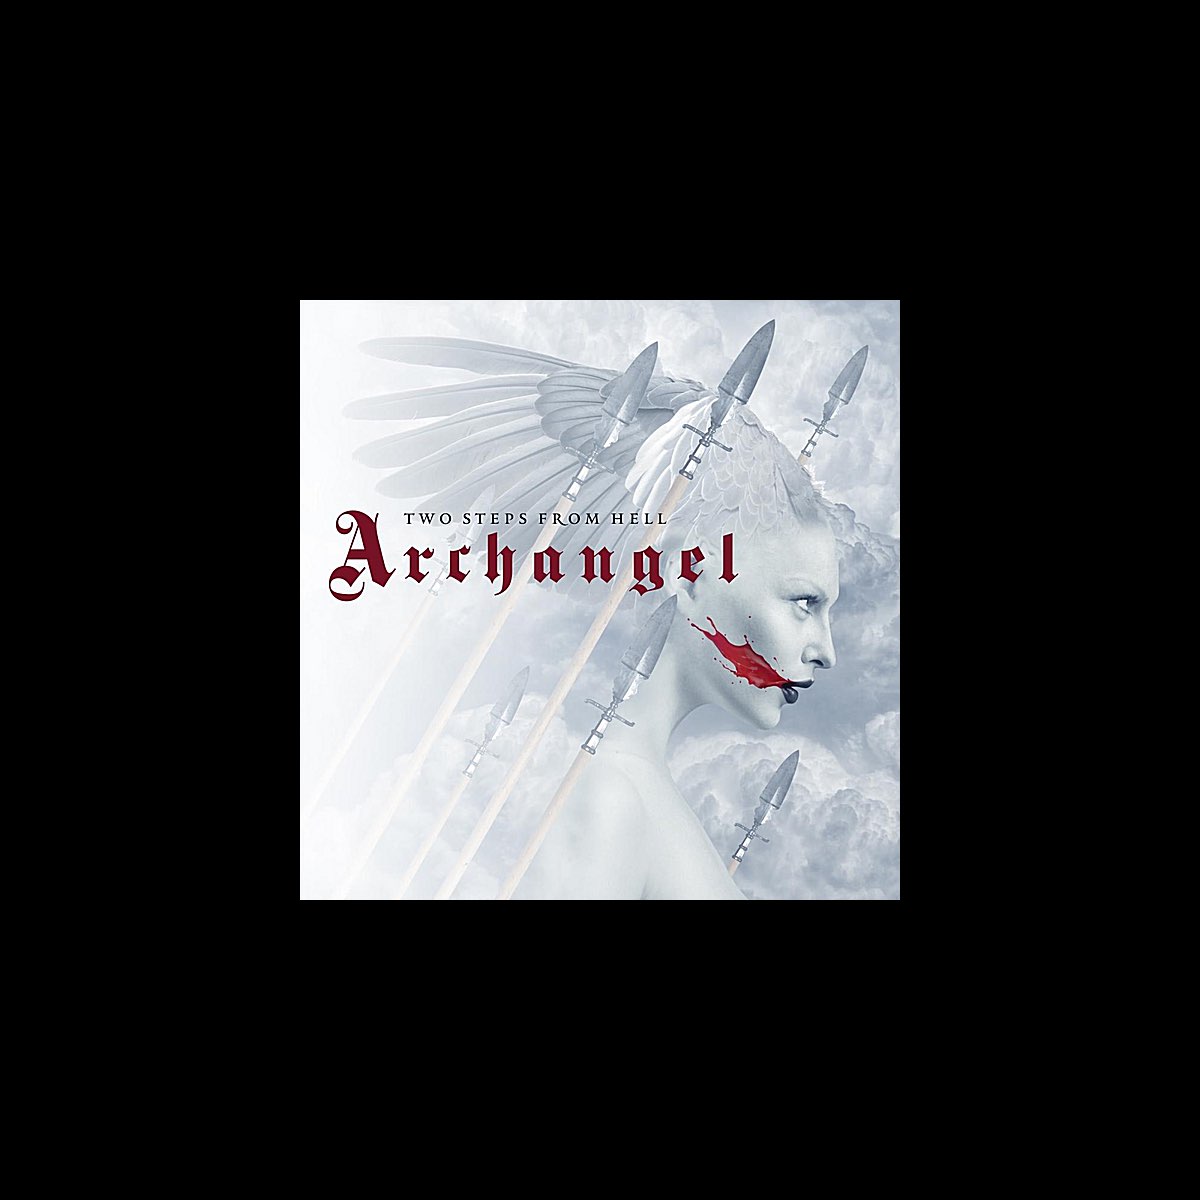 Archangel by Two Steps From Hell on Apple Music